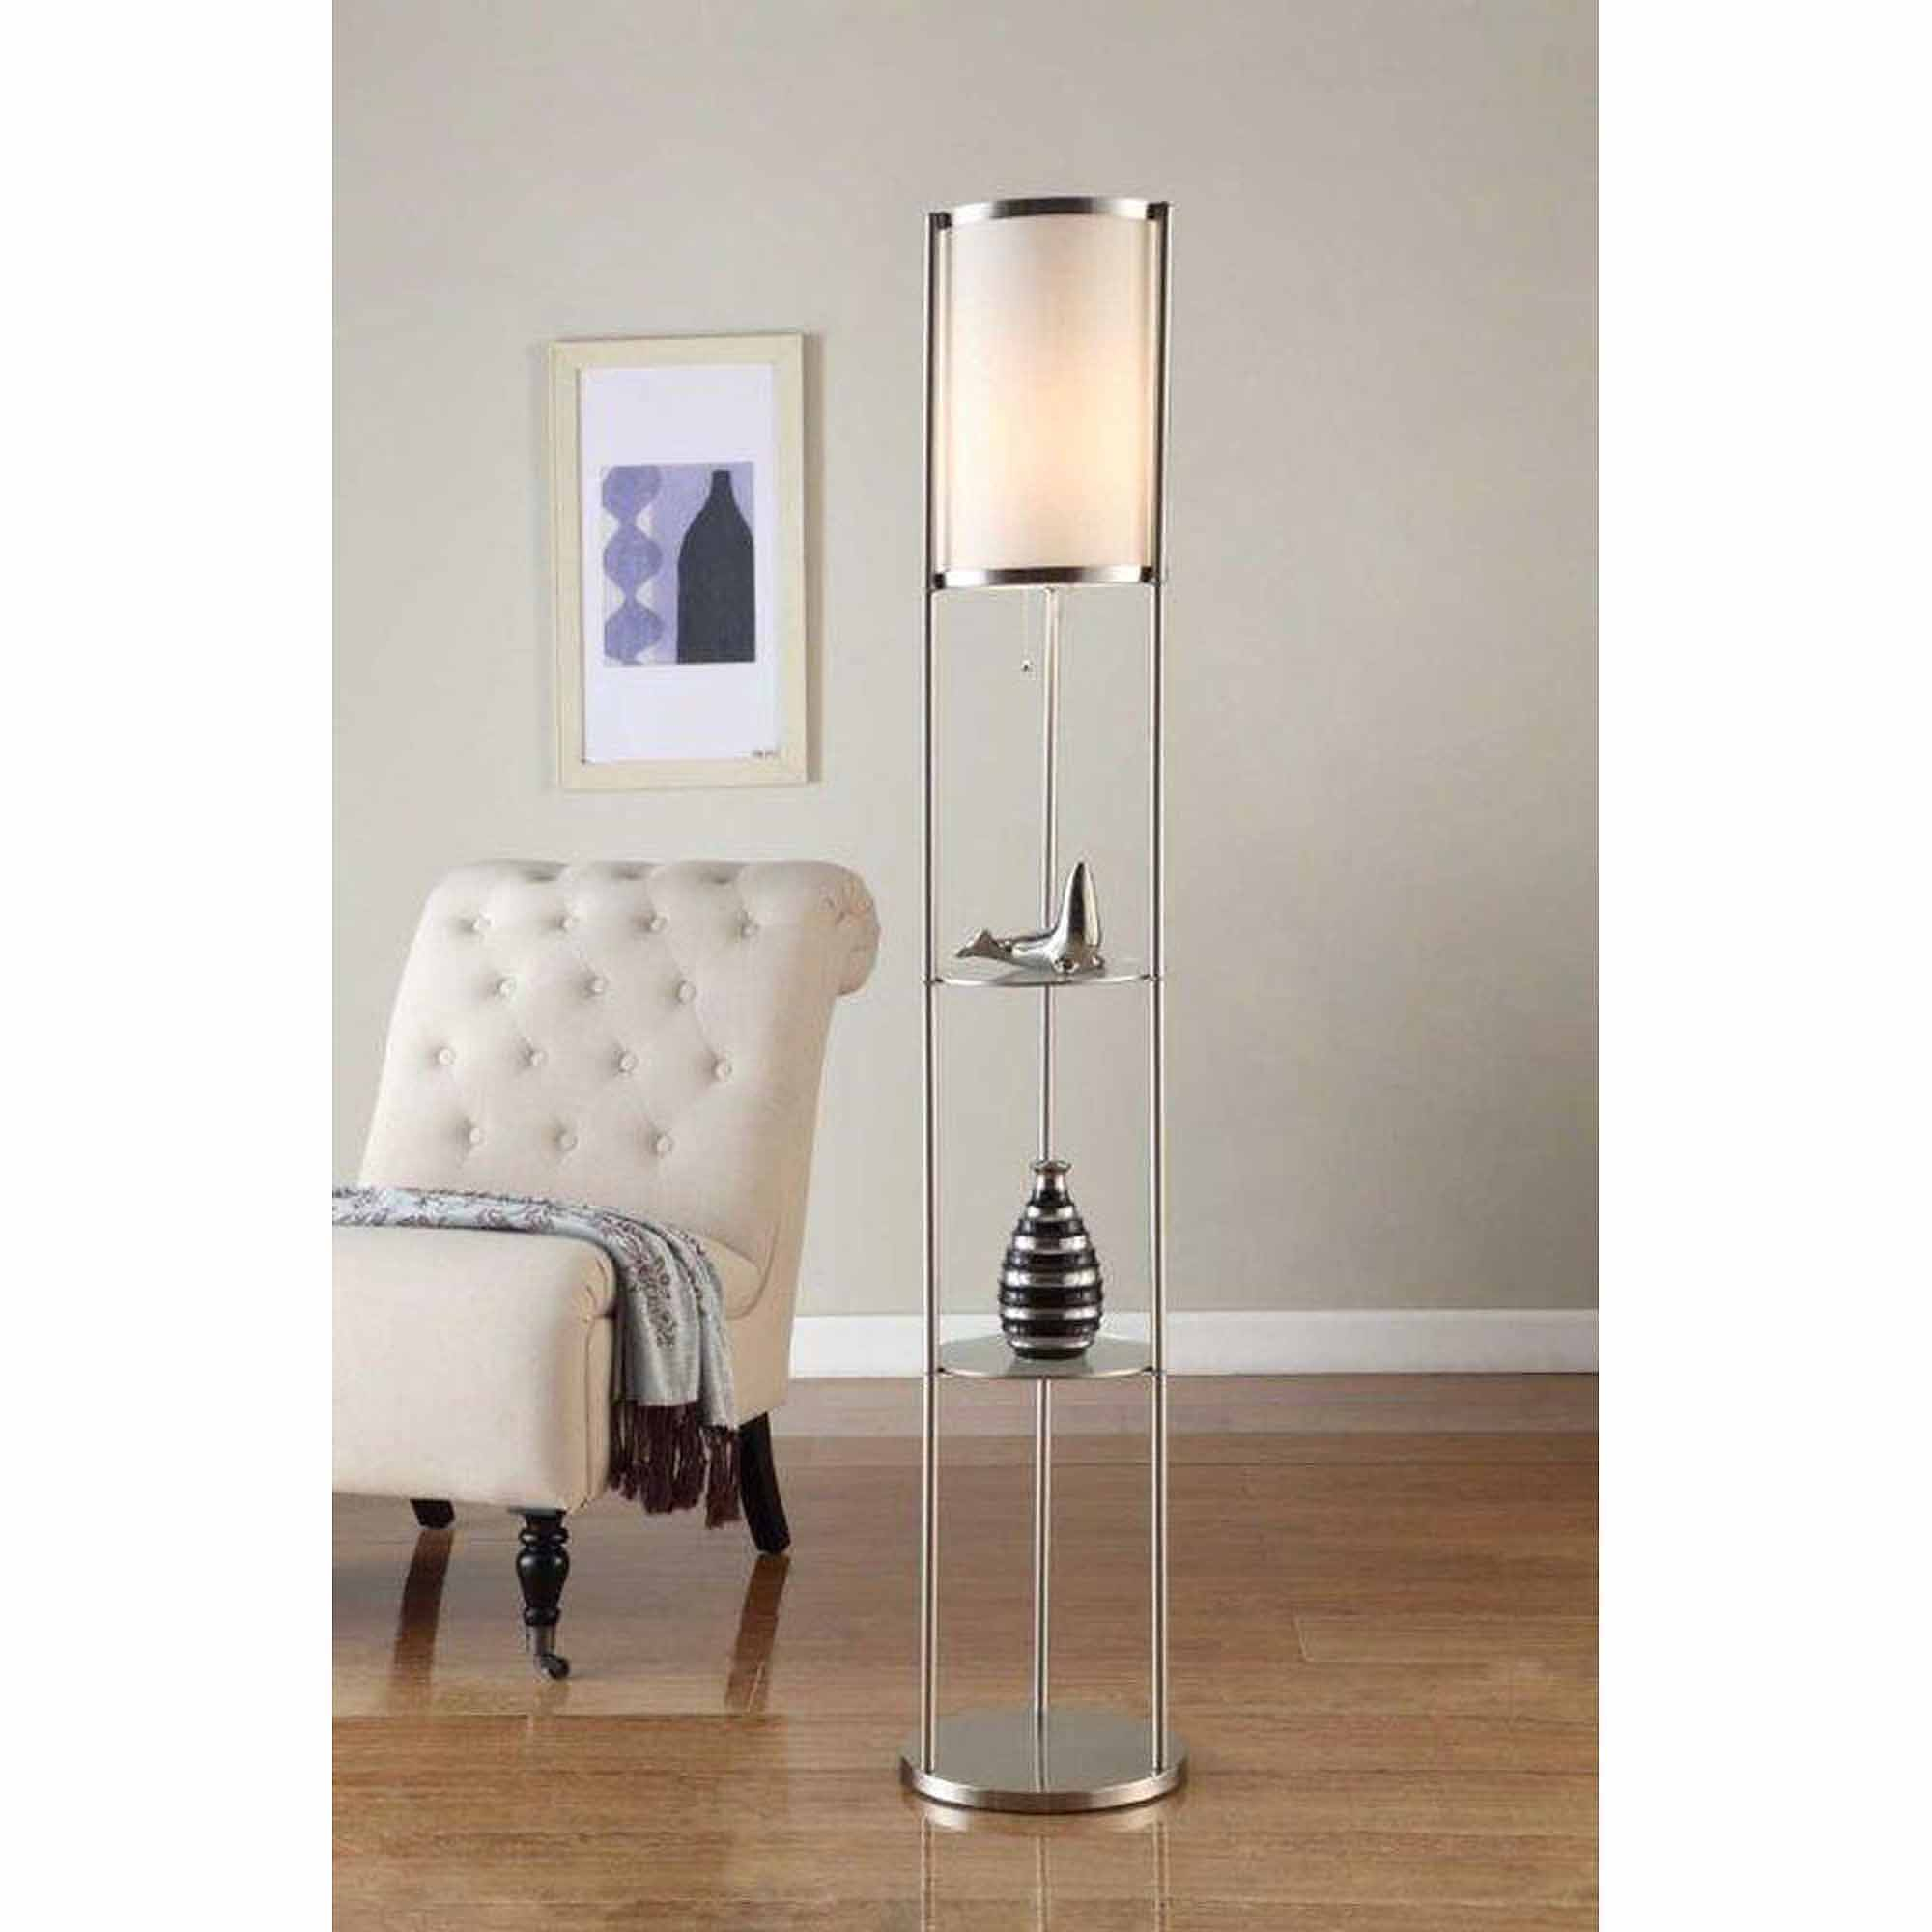 Inspirations Holmo Floor Lamp For Cool Interior Lighting inside sizing 2000 X 2000